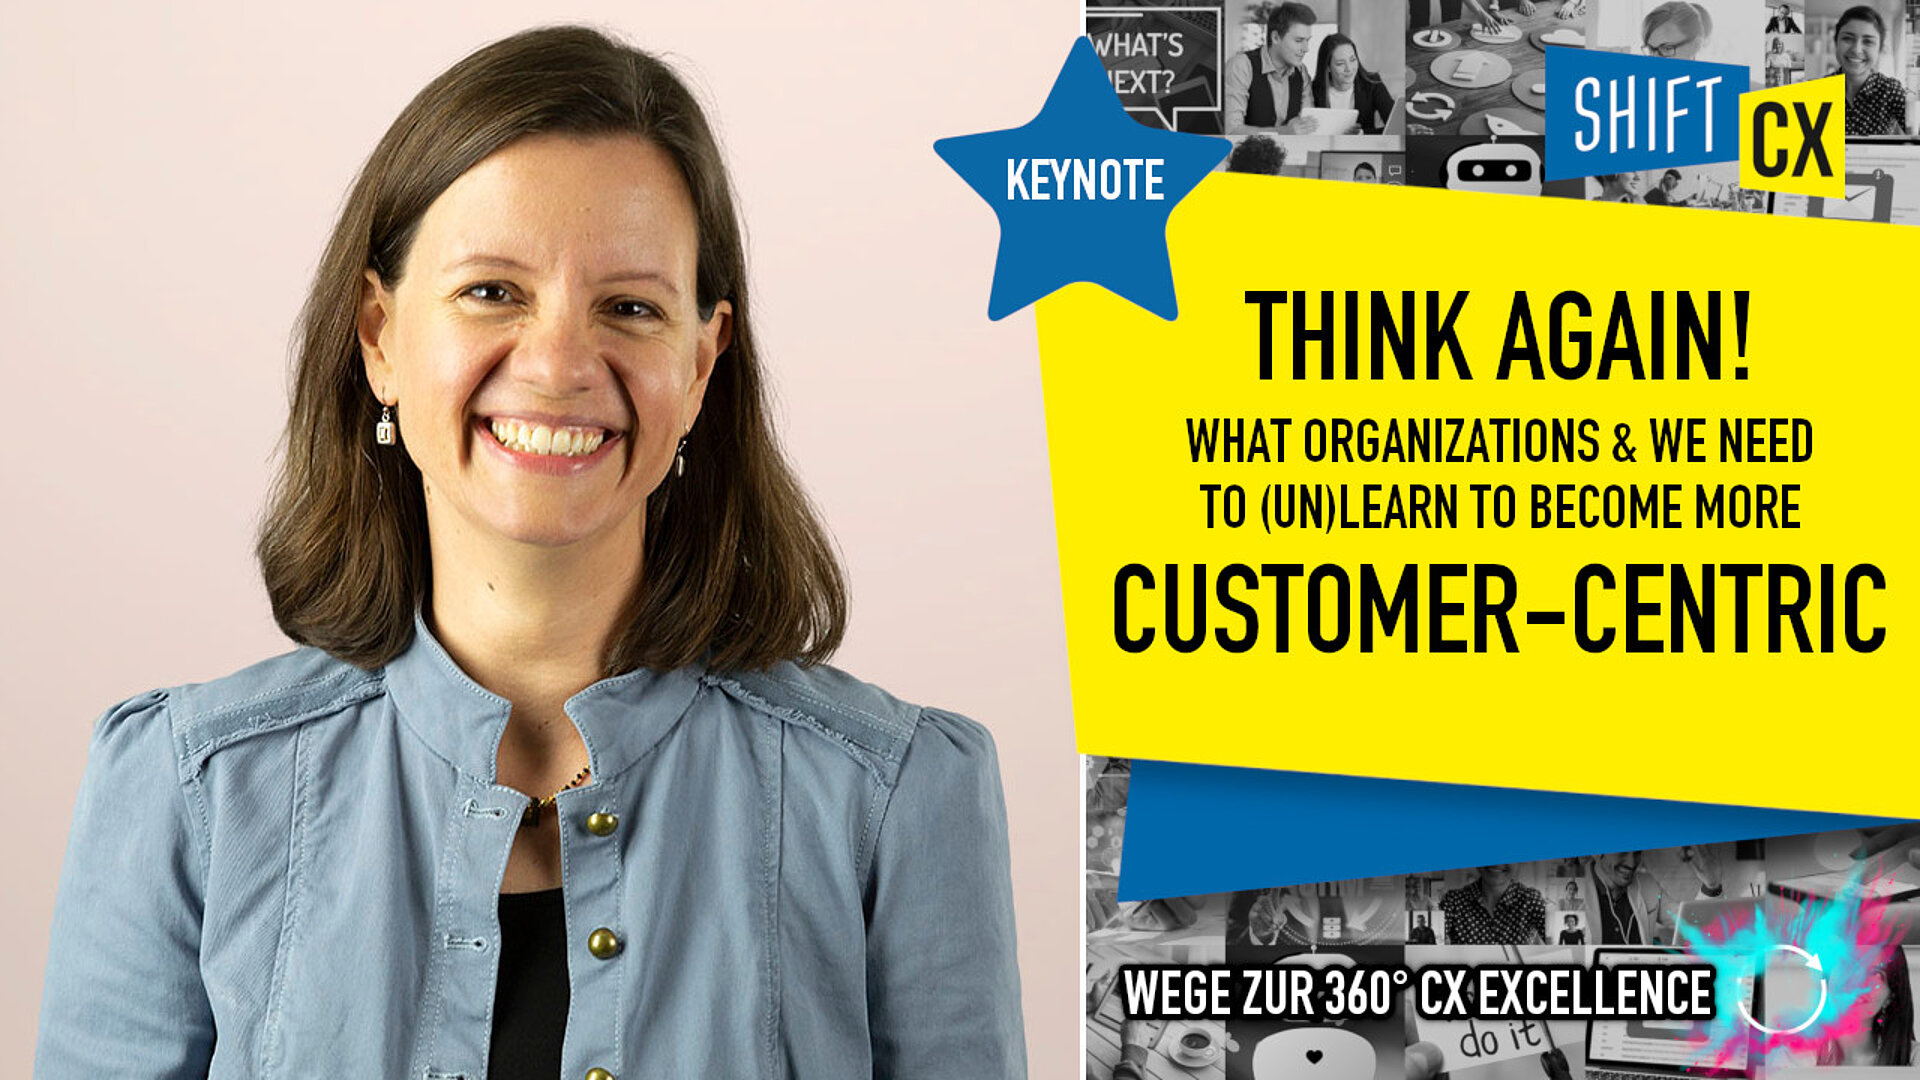 Think Again! What Our Organizations And We Need To (Un)Learn To Become More Customer-Centric